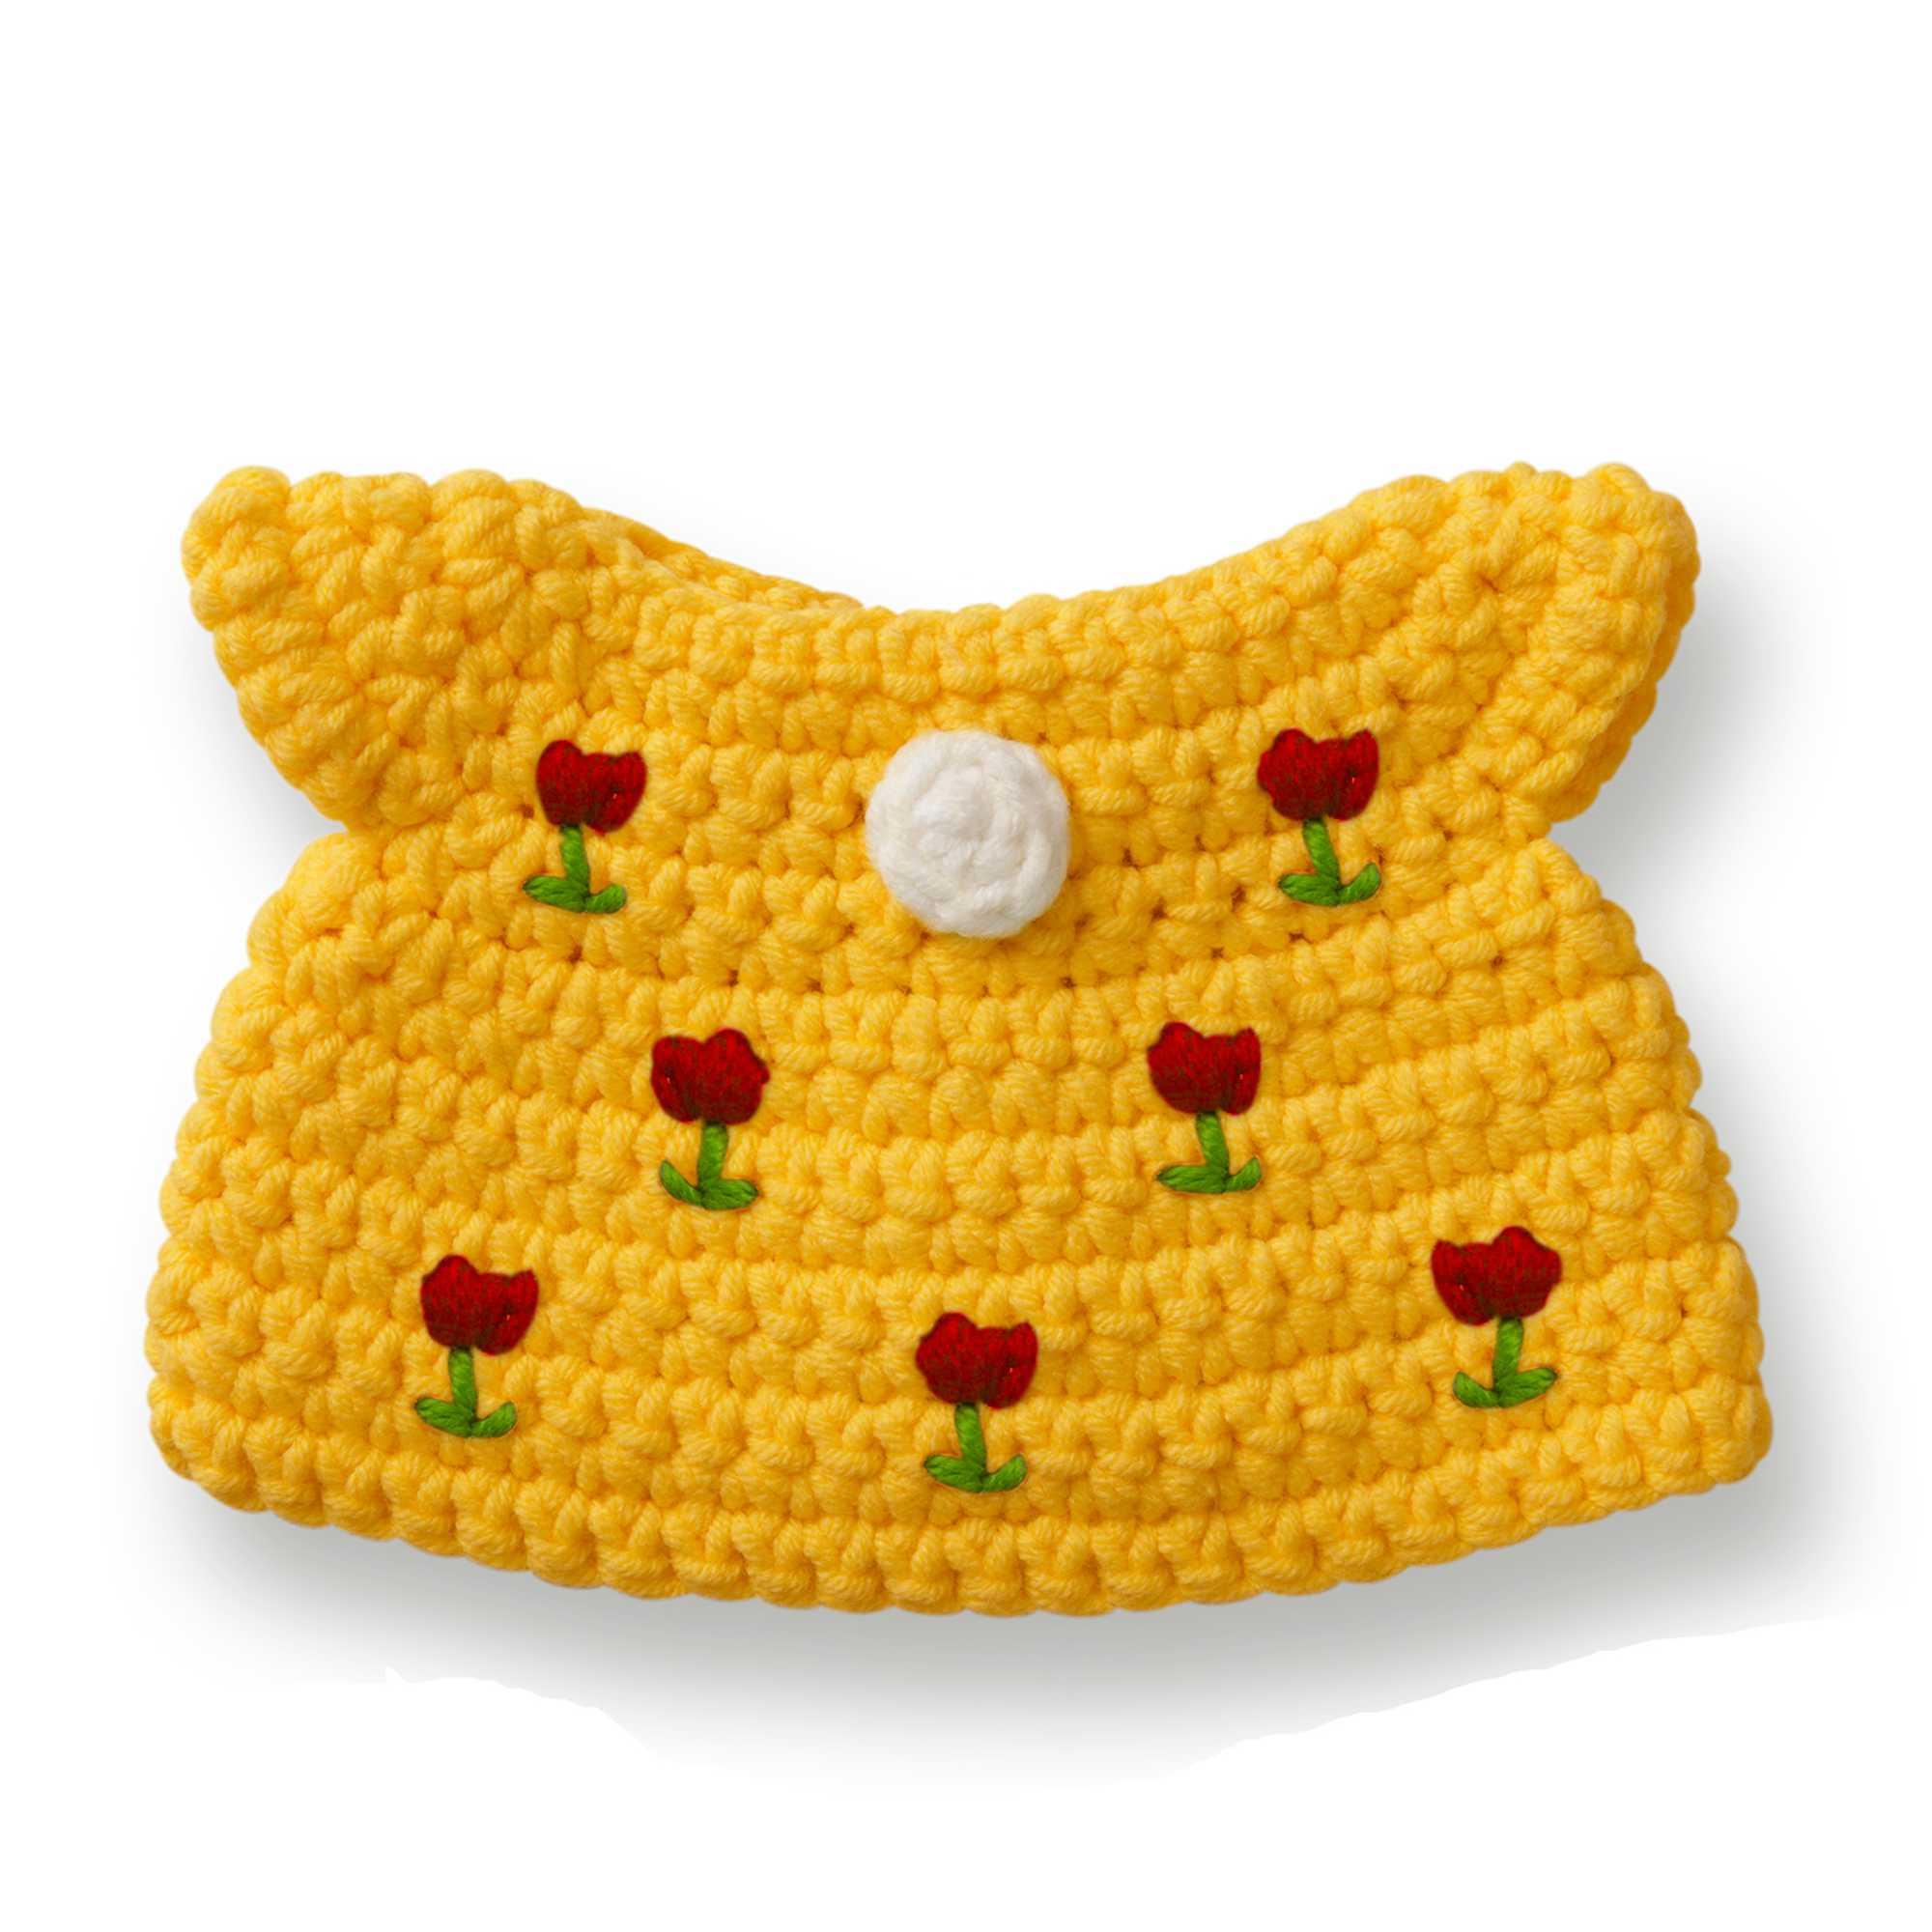 Just Dutch handmade crocheted outfit, yellow tulip drress